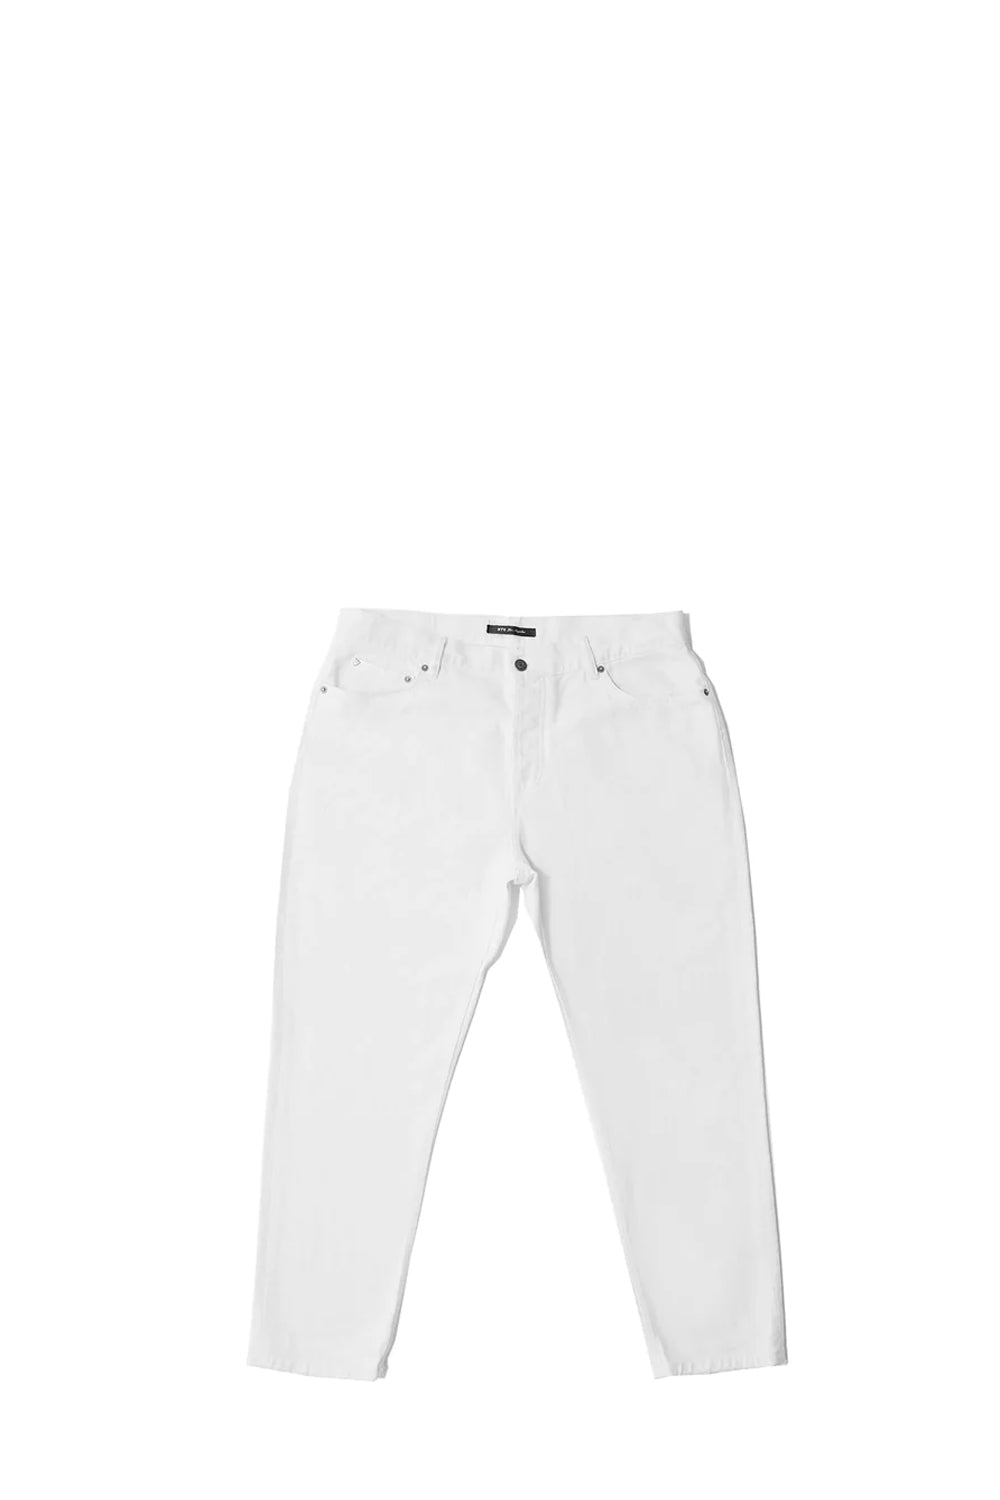 LOOSE WHITE Loose fit jeans, 5 pockets, hidden front button closure. 100% cotton. Made in Italy. HTC LOS ANGELES